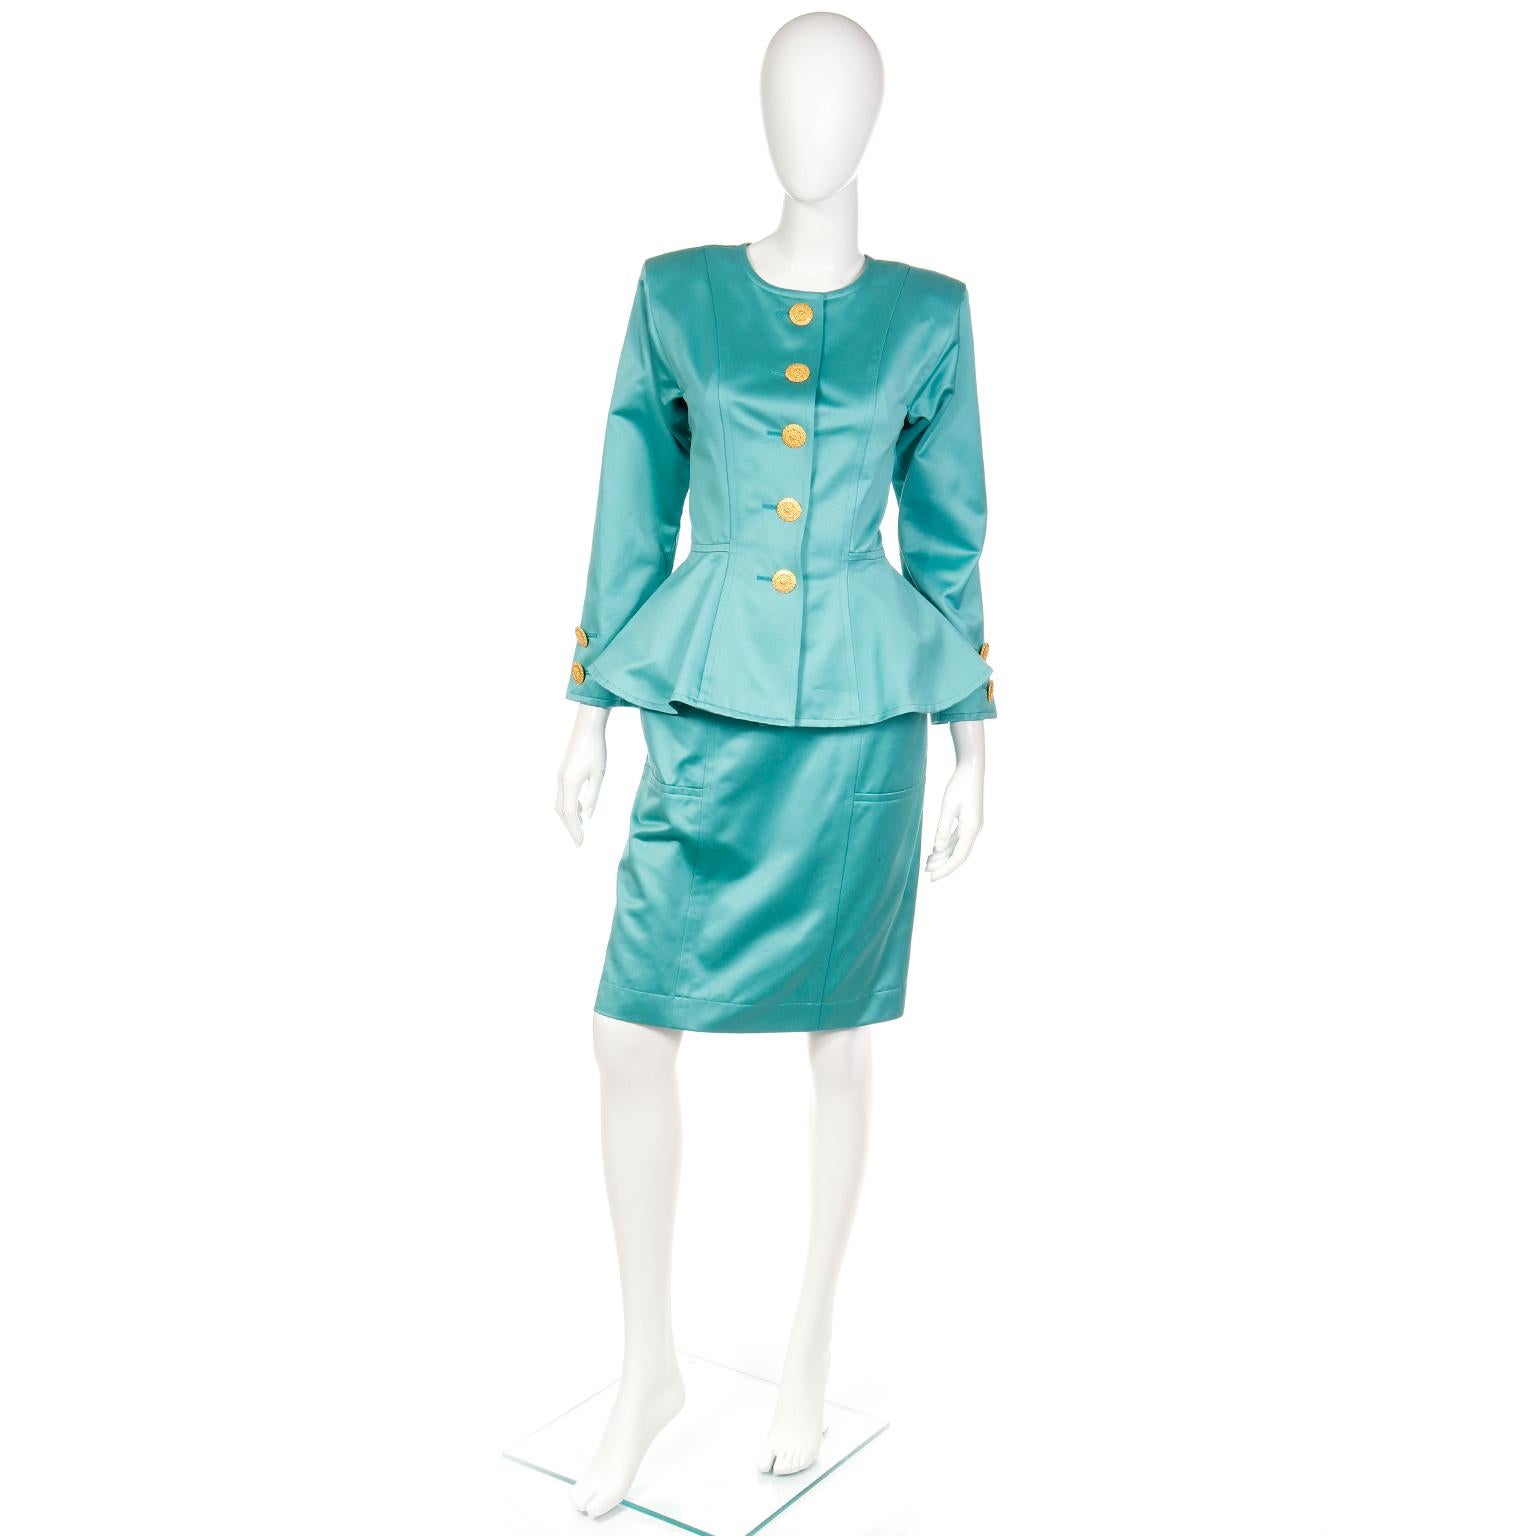 We love vintage Yves Saint Laurent and find that his pieces truly stand the test of time! This is a 1991 Deadstock YSL two piece green polished cotton suit with a collarless peplum jacket and straight skirt. 
The pretty peplum jacket has princess